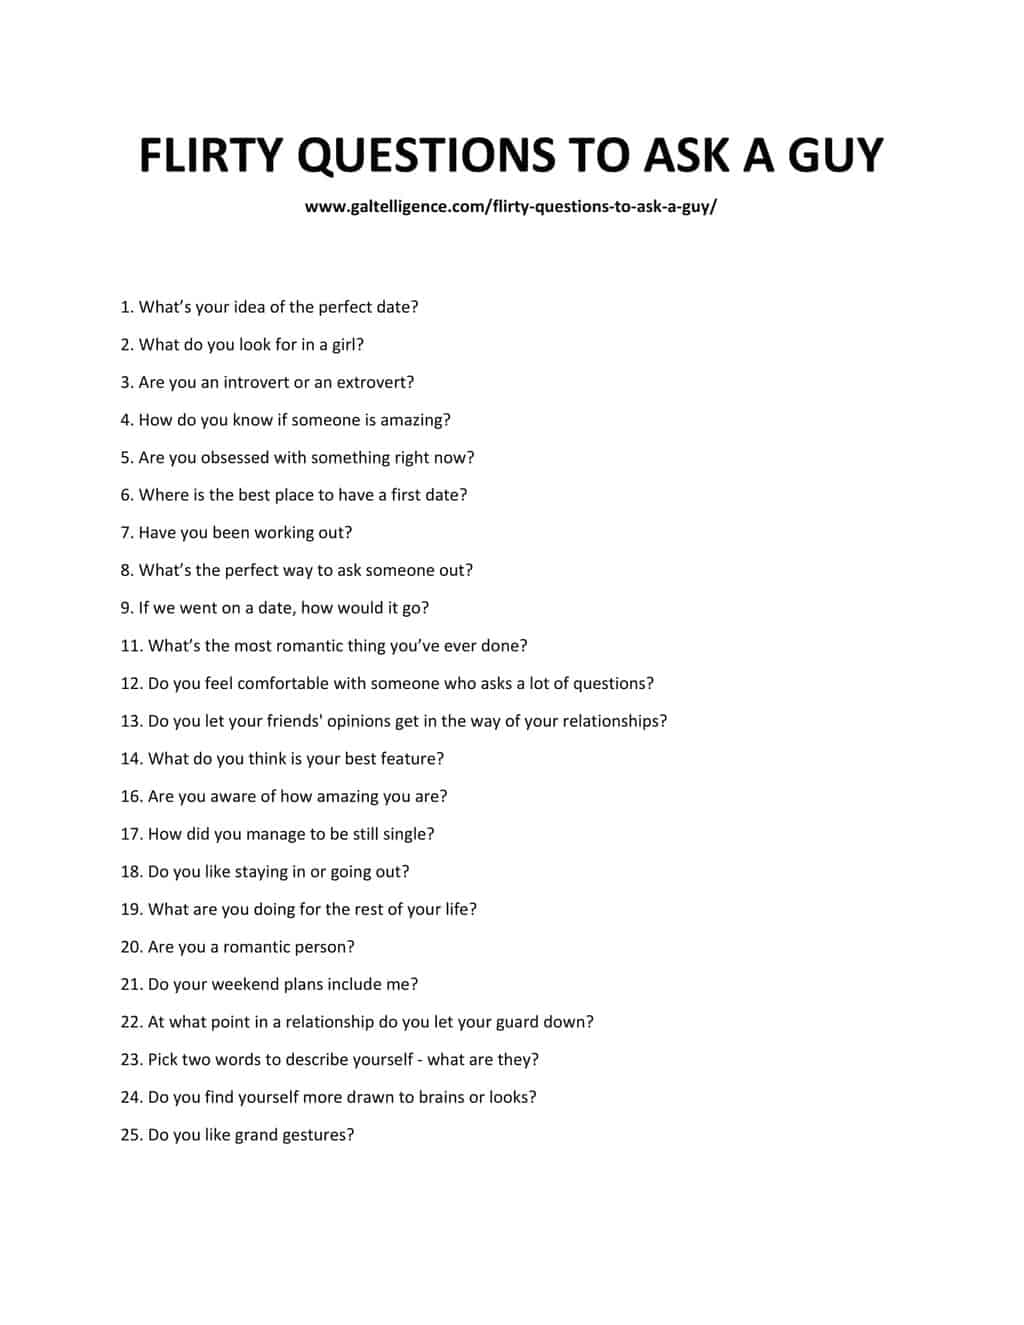 Embarrassing questions to ask guys